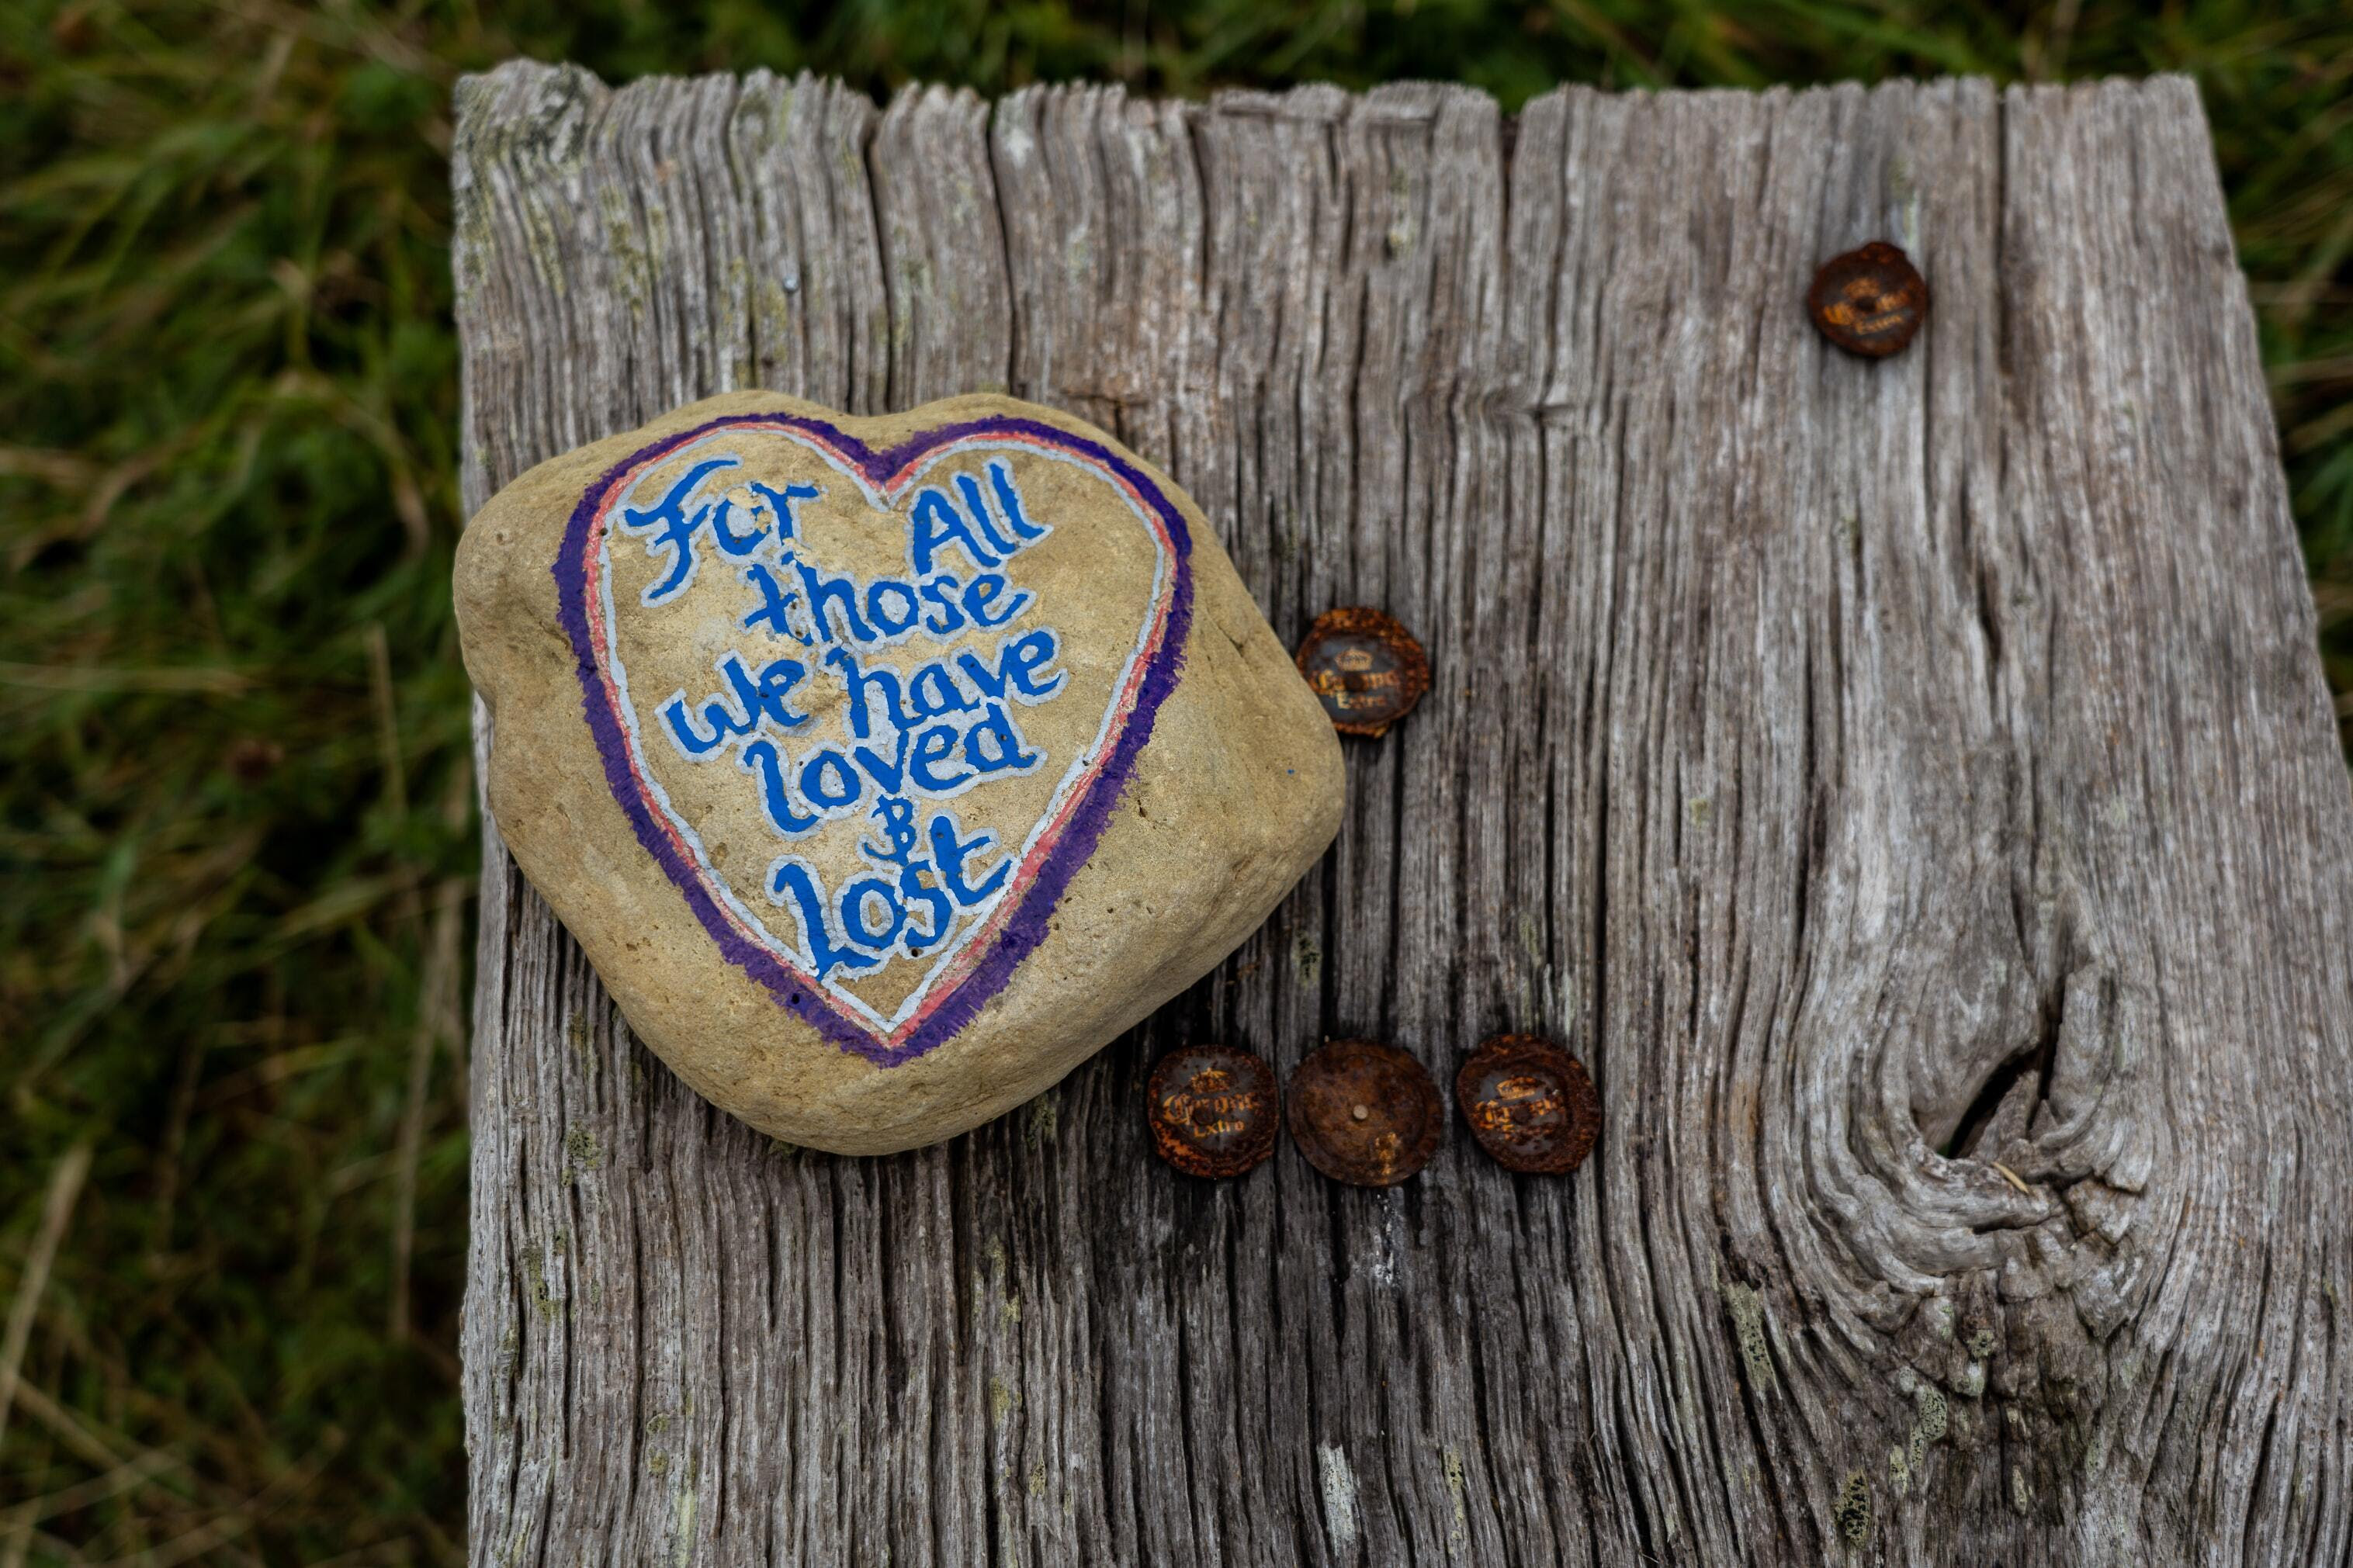 A rock painted with the words "For all those we have loved and lost"